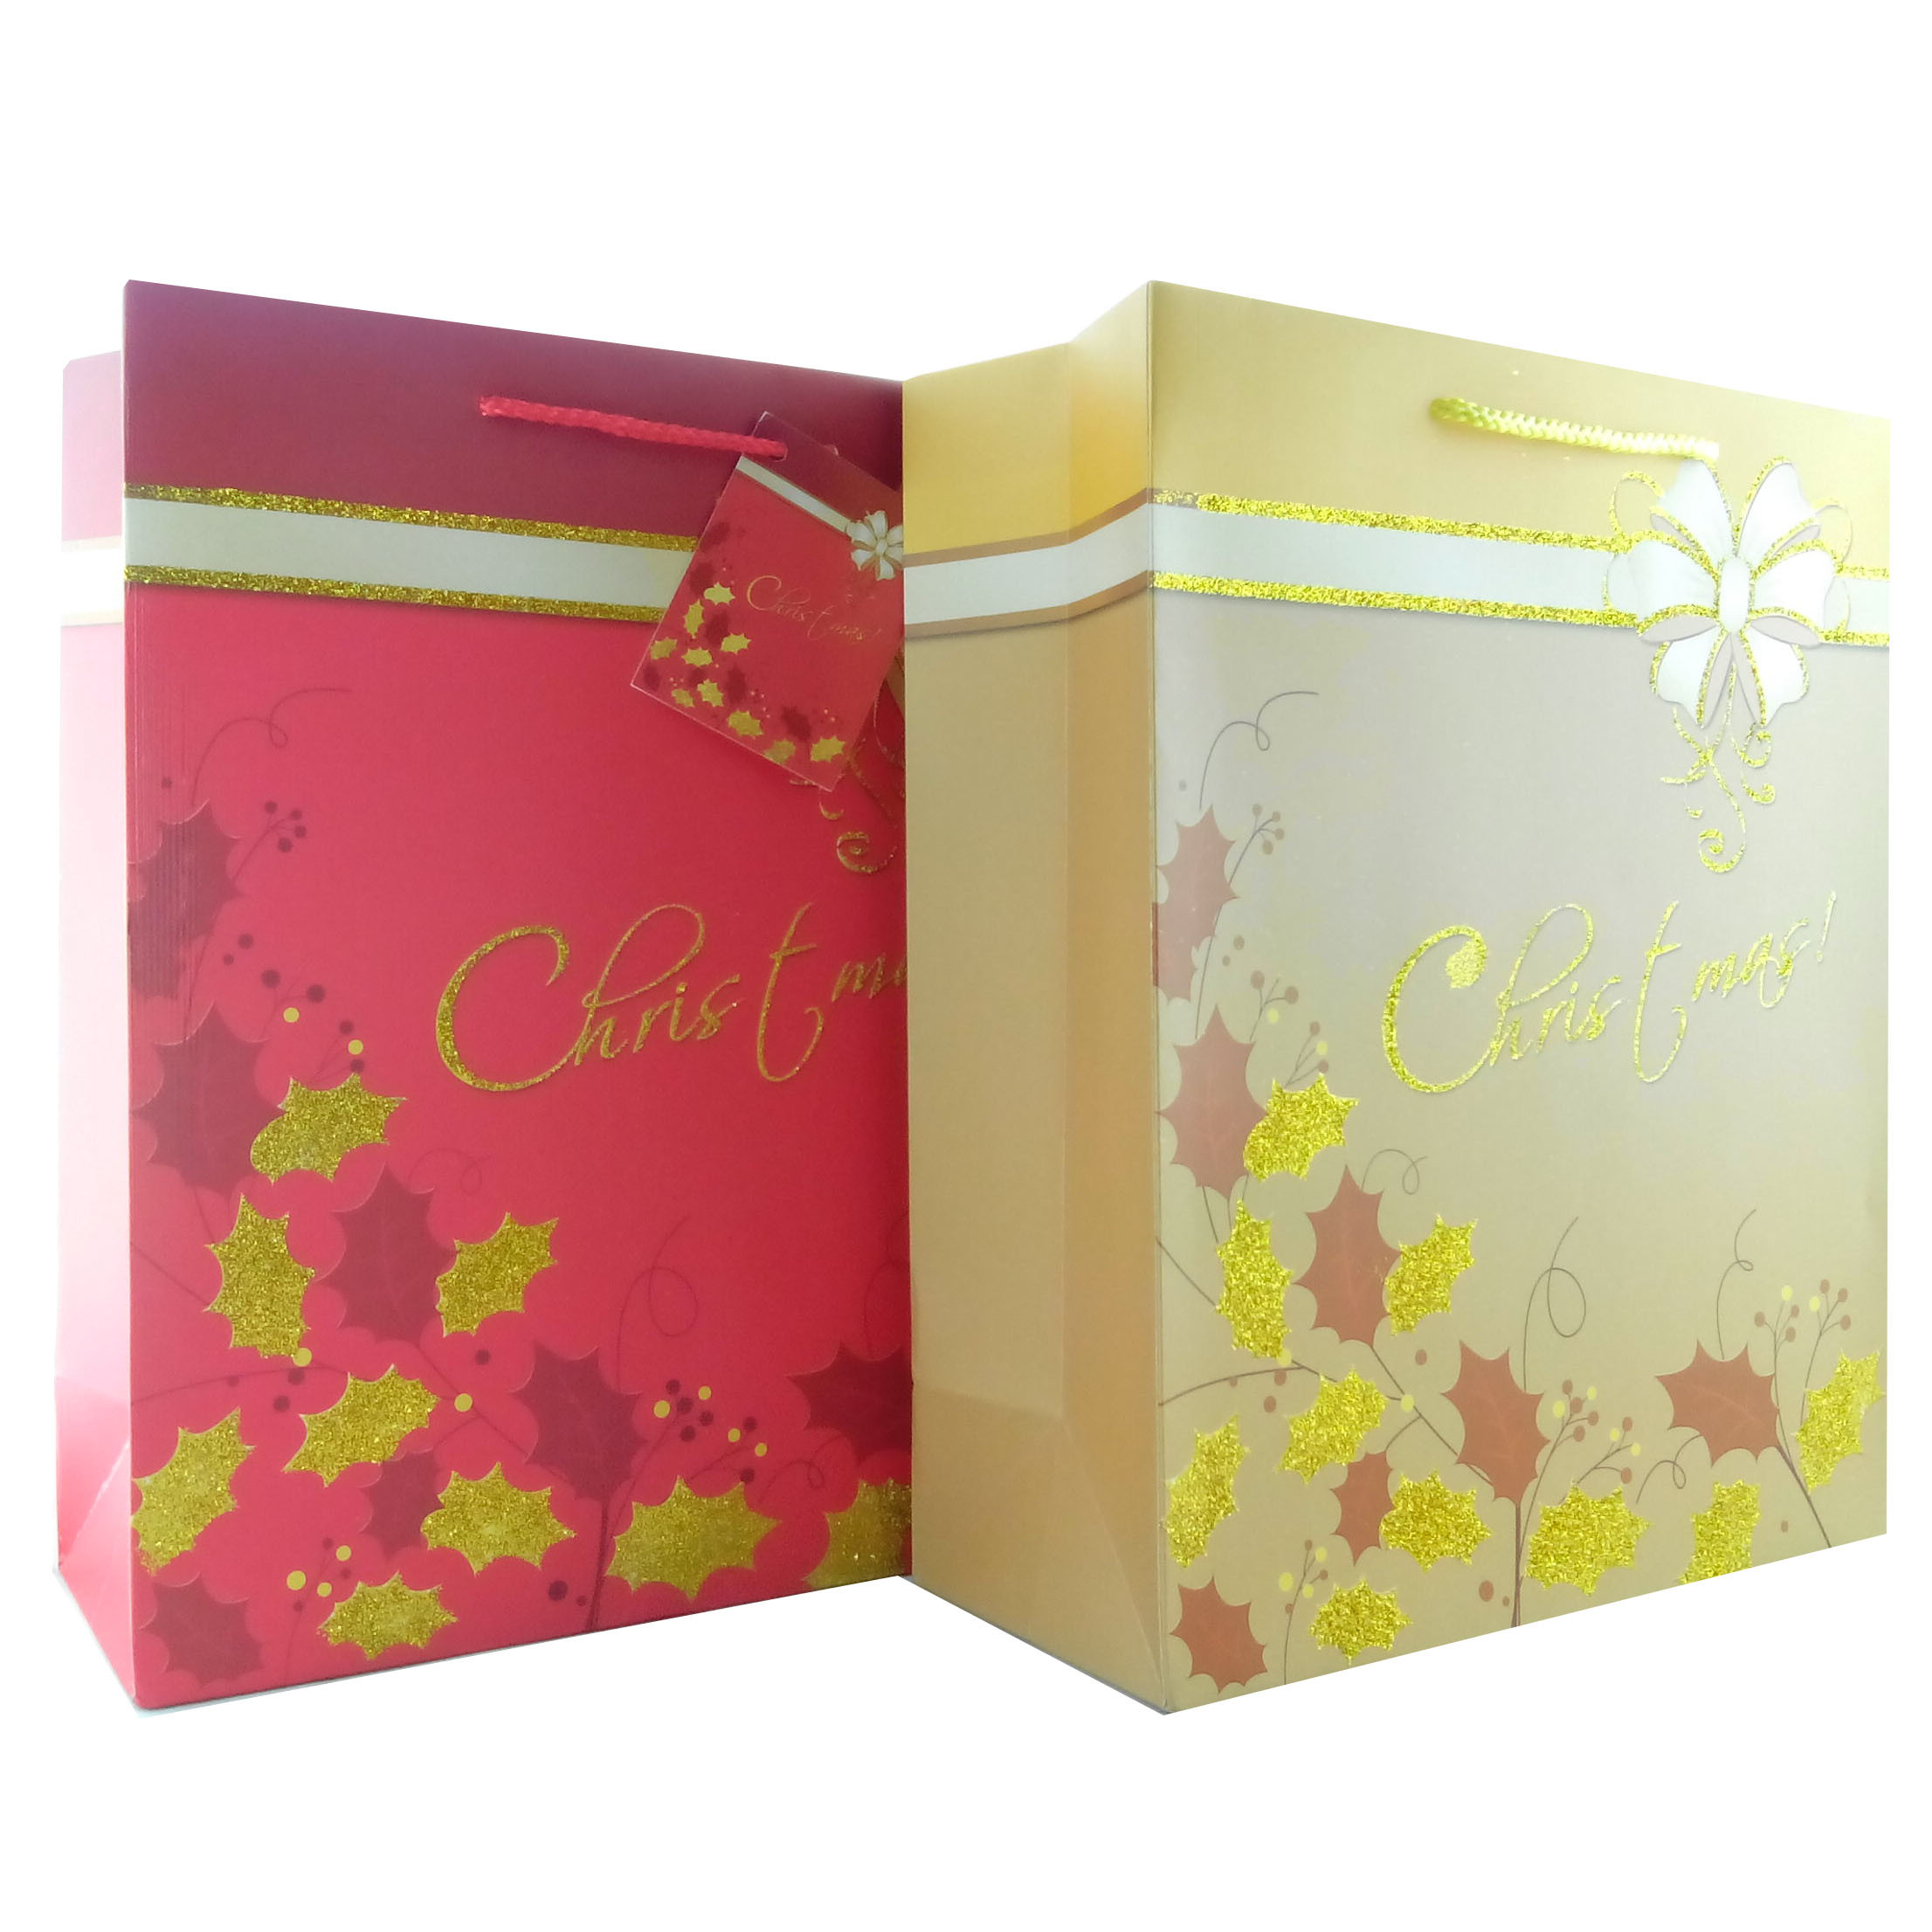  Wholesales Christmas Gift Bags & Party Supplies Manufactures